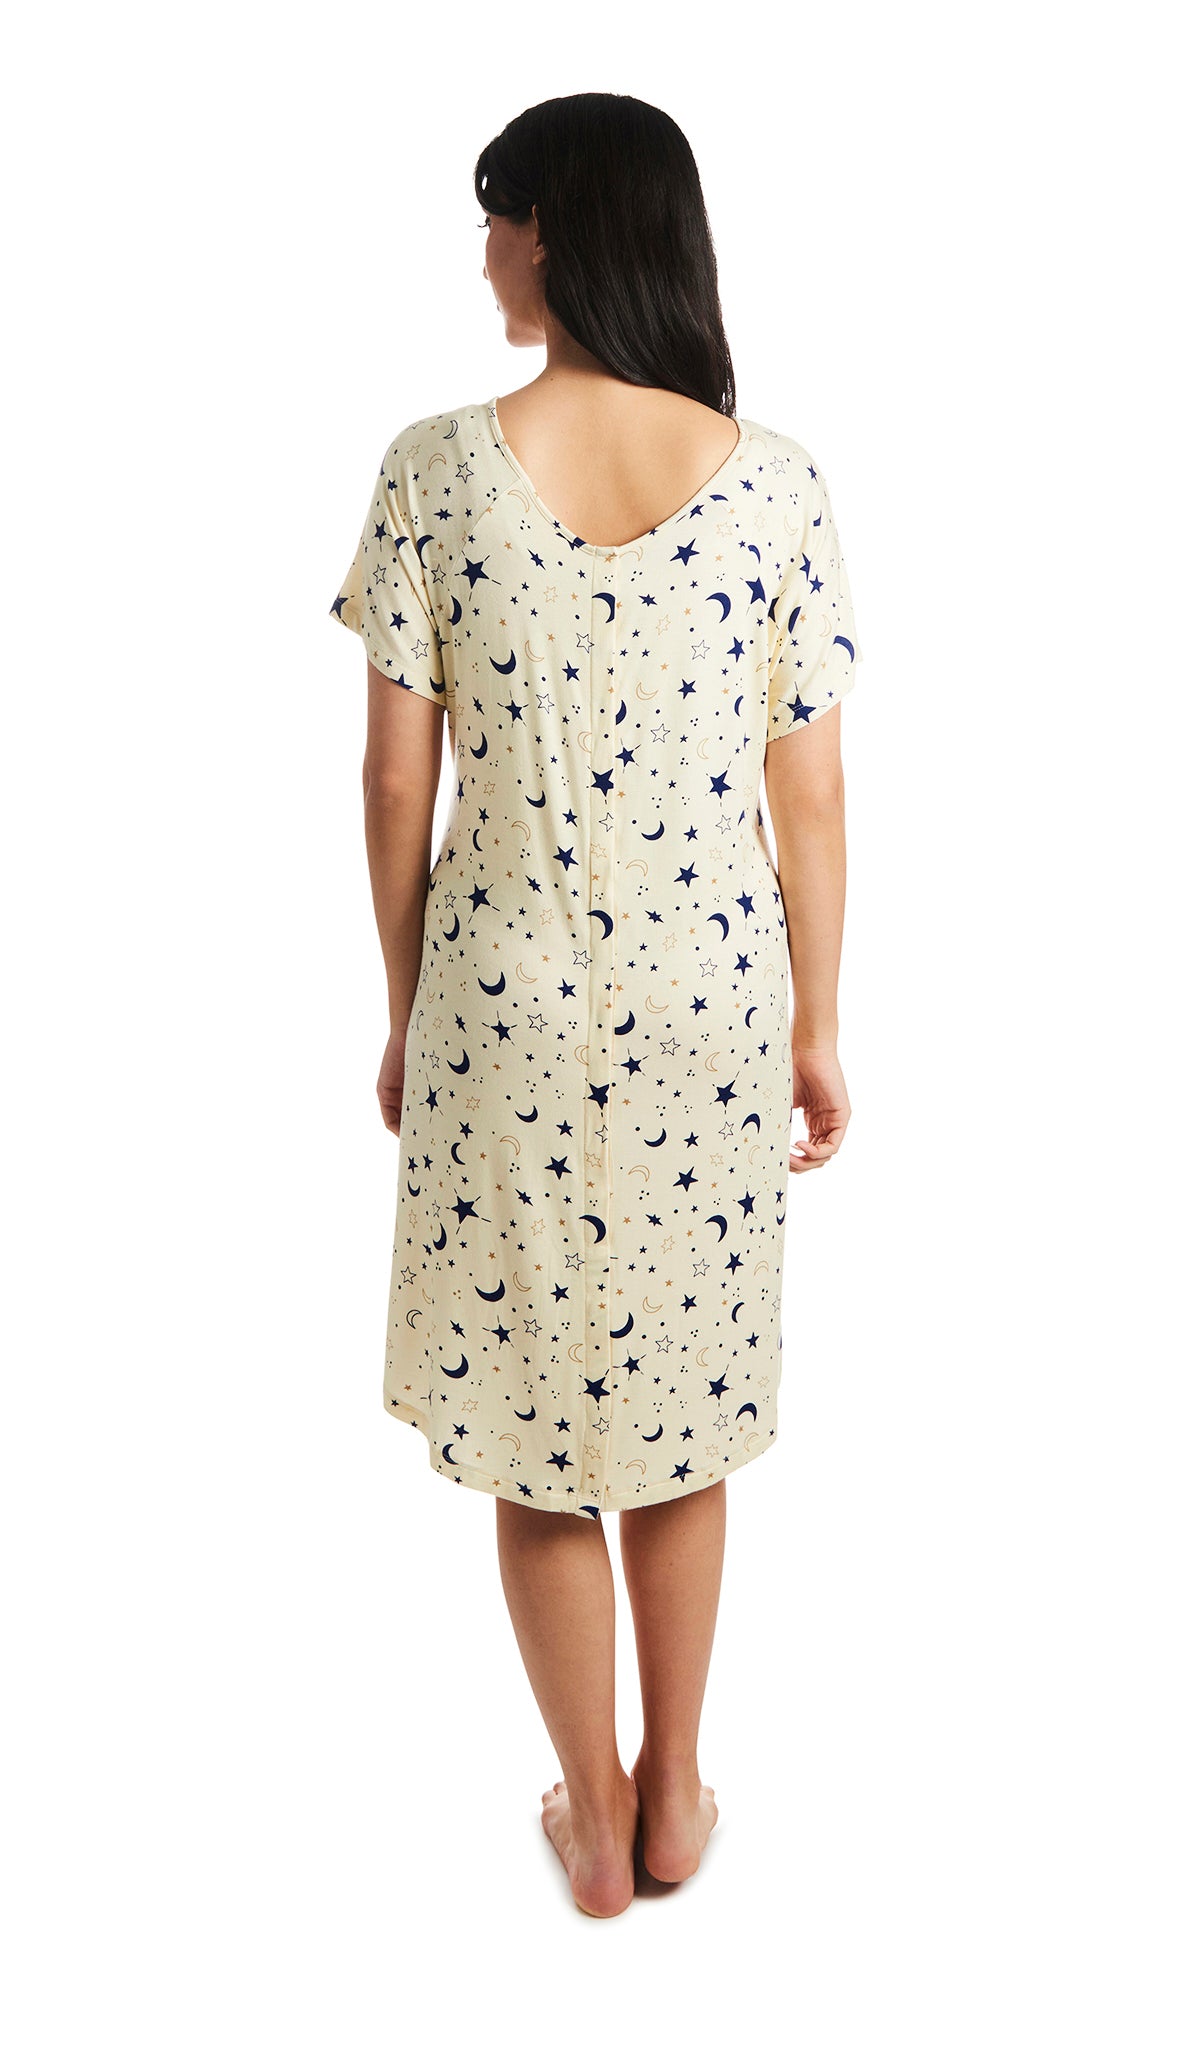 Twinkle Rosa hospital gown. Back shot of woman wearing hospital gown with full-length snap-back opening.